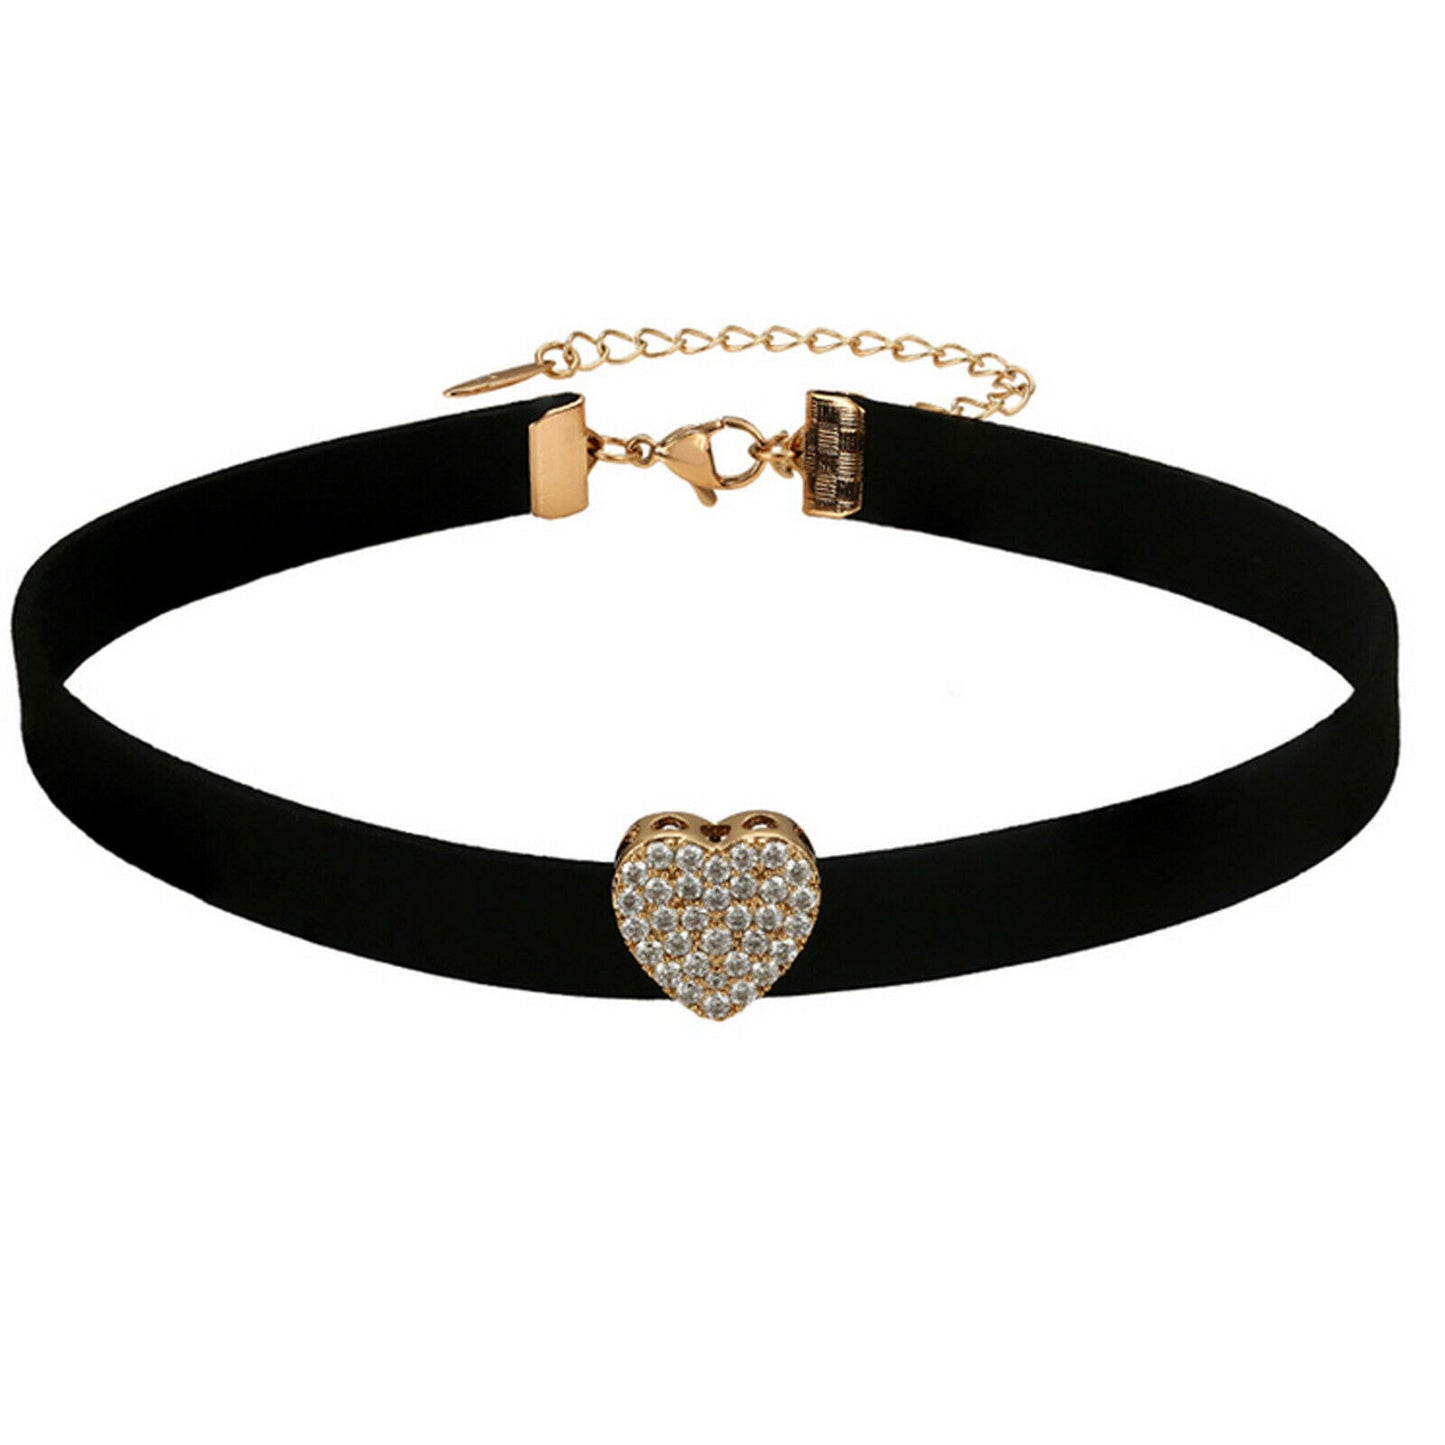 Necklaces - 18K Gold Plated. Icy Heart Choker Collar Necklace Velvet Black cord Lobster Clasp